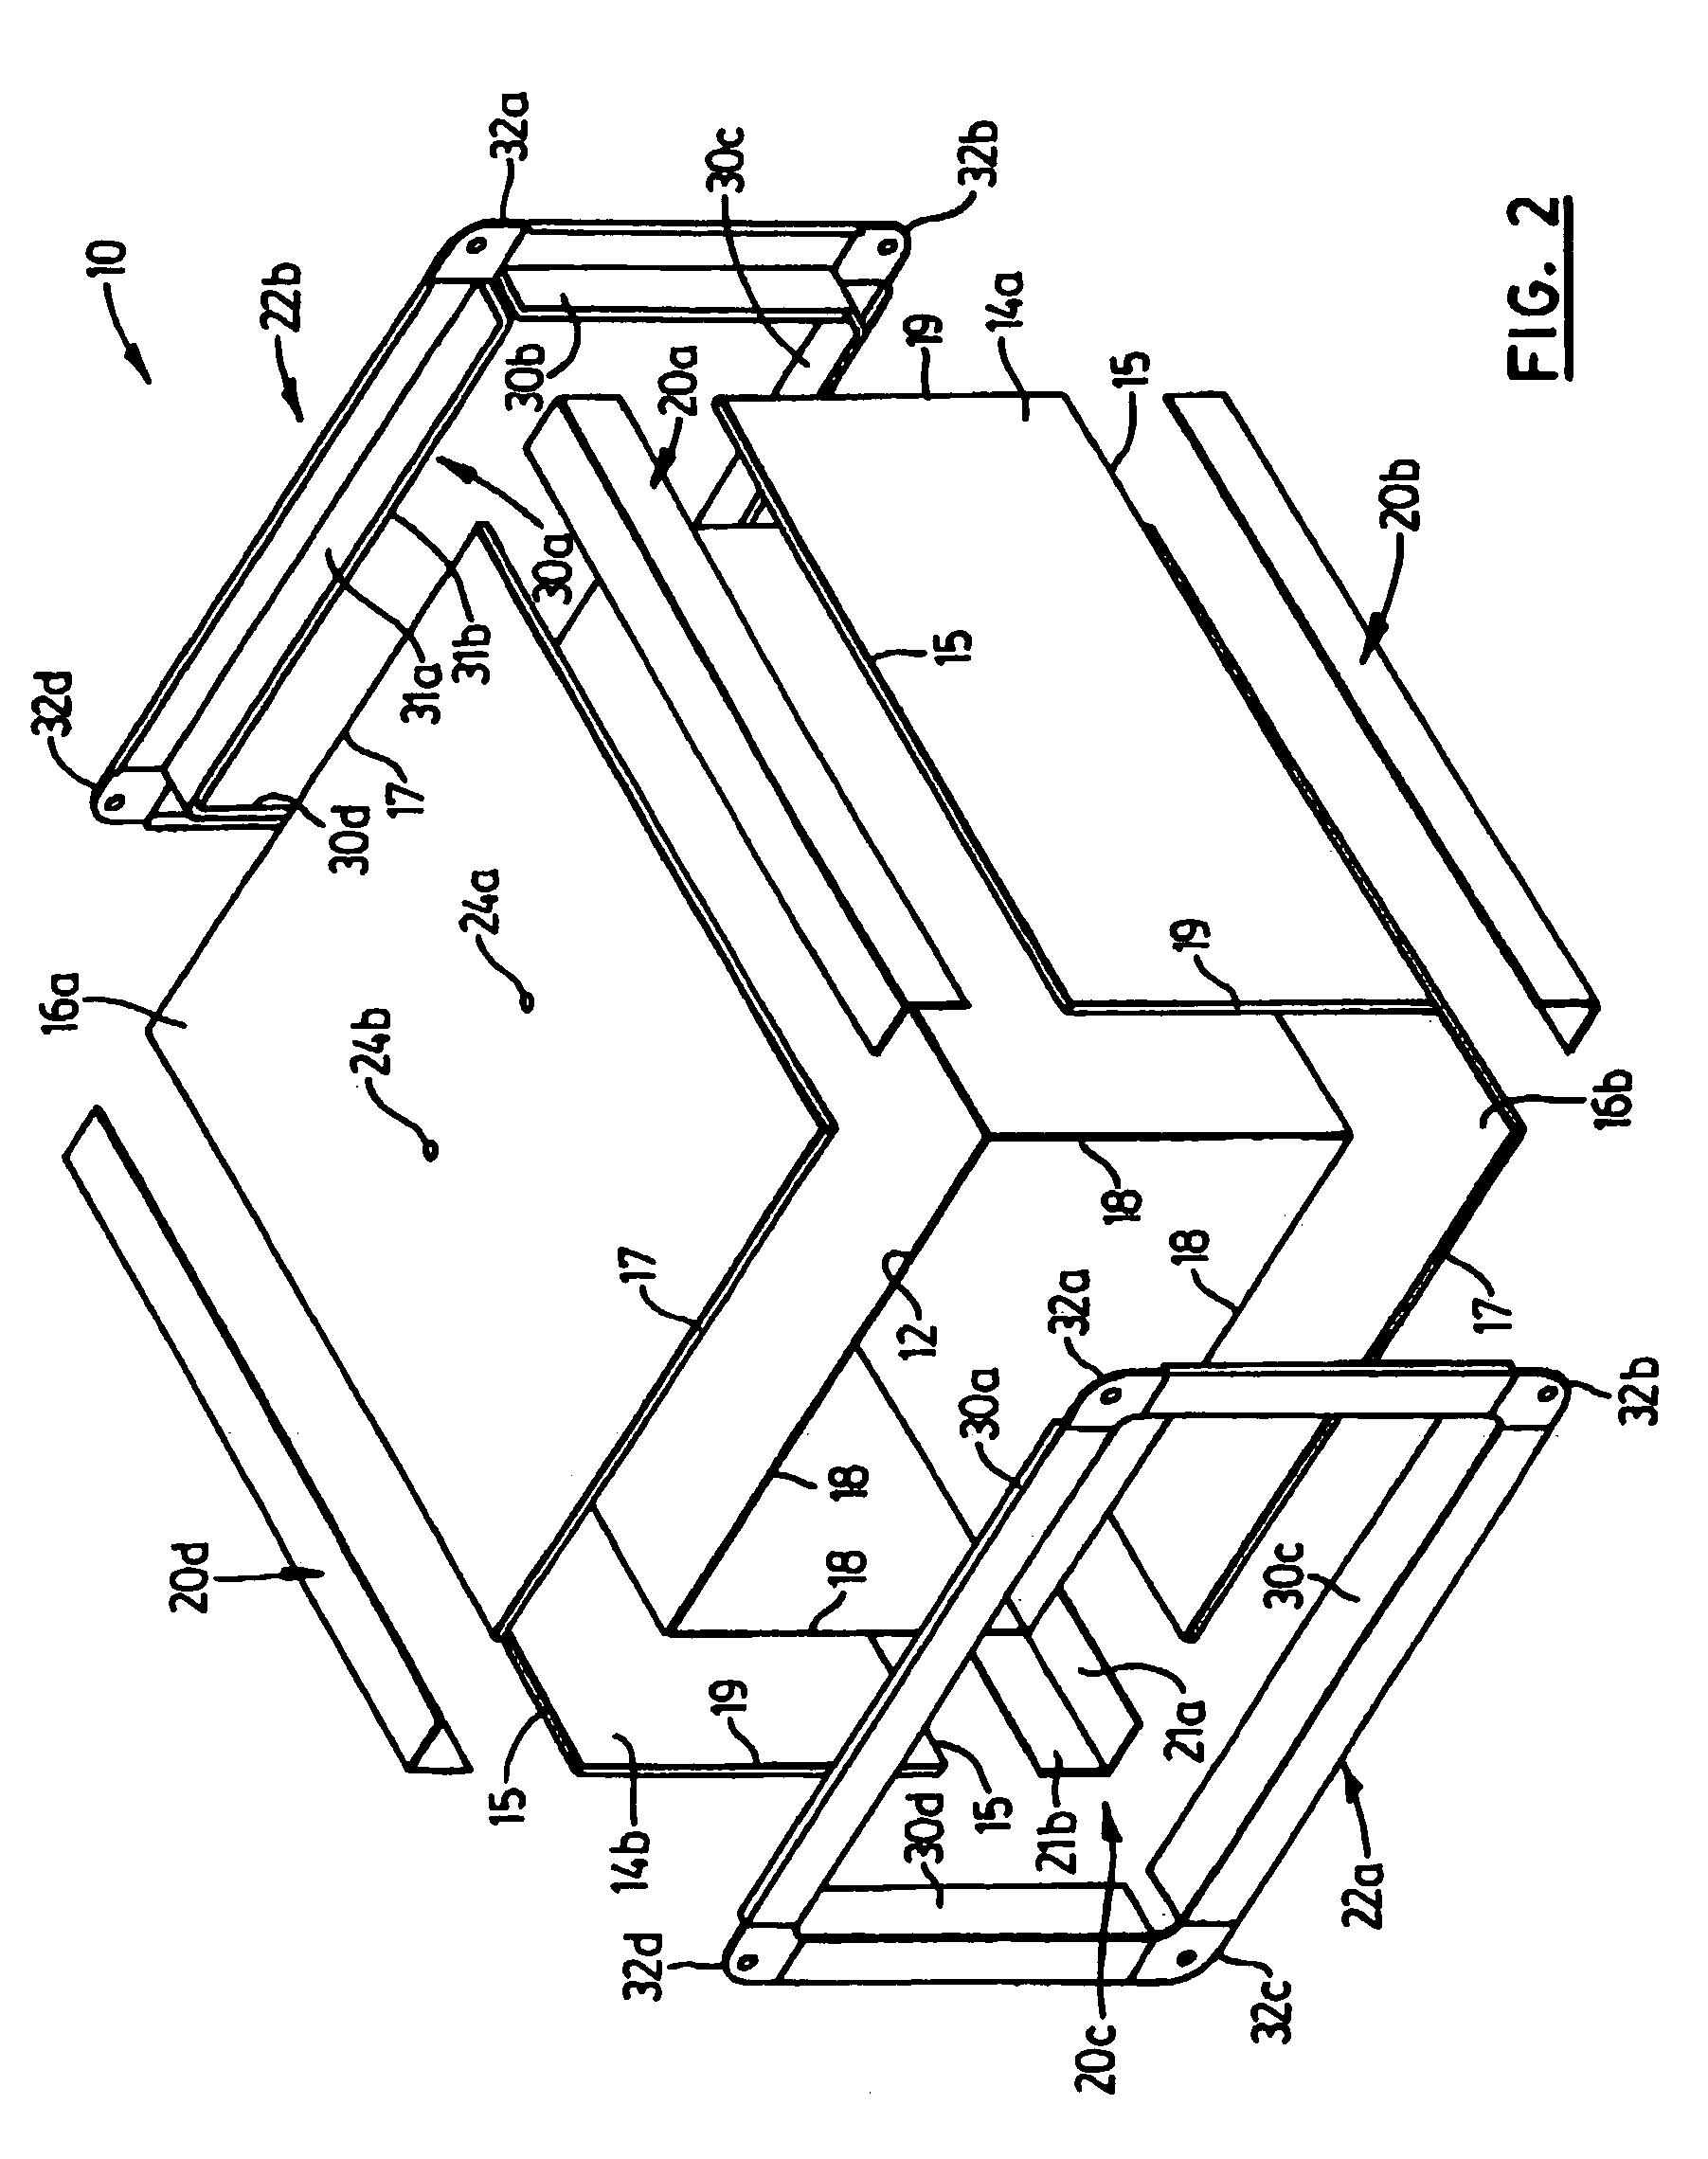 Apparatus for a fire-rated duct